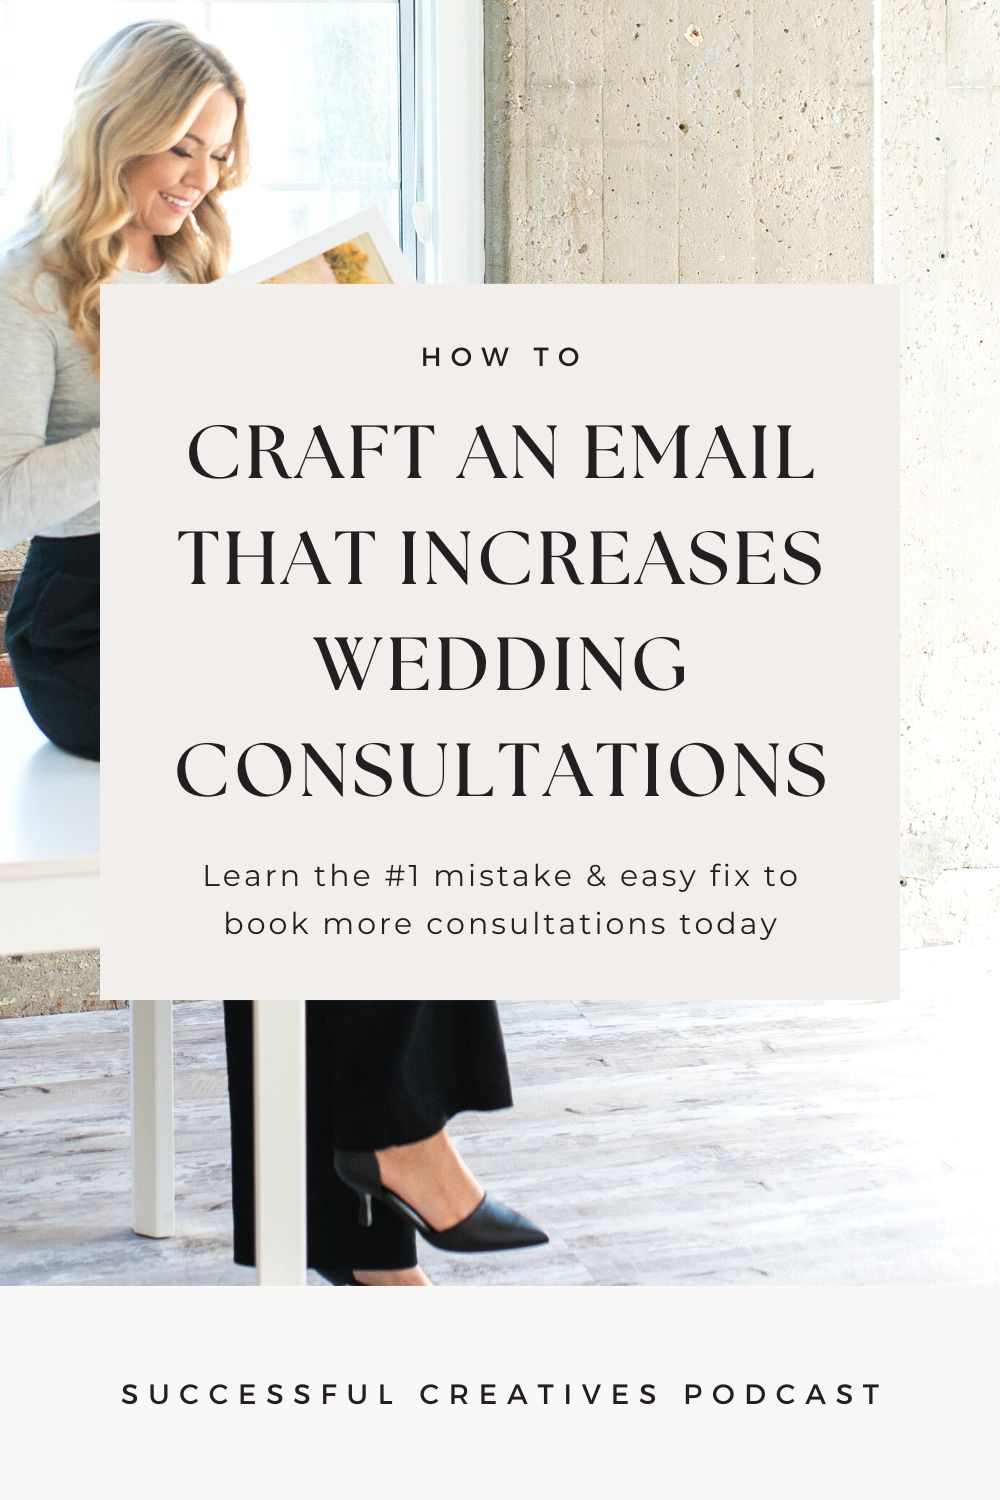 Tips for wedding photographer and creatives to craft emails that book more wedding consultations